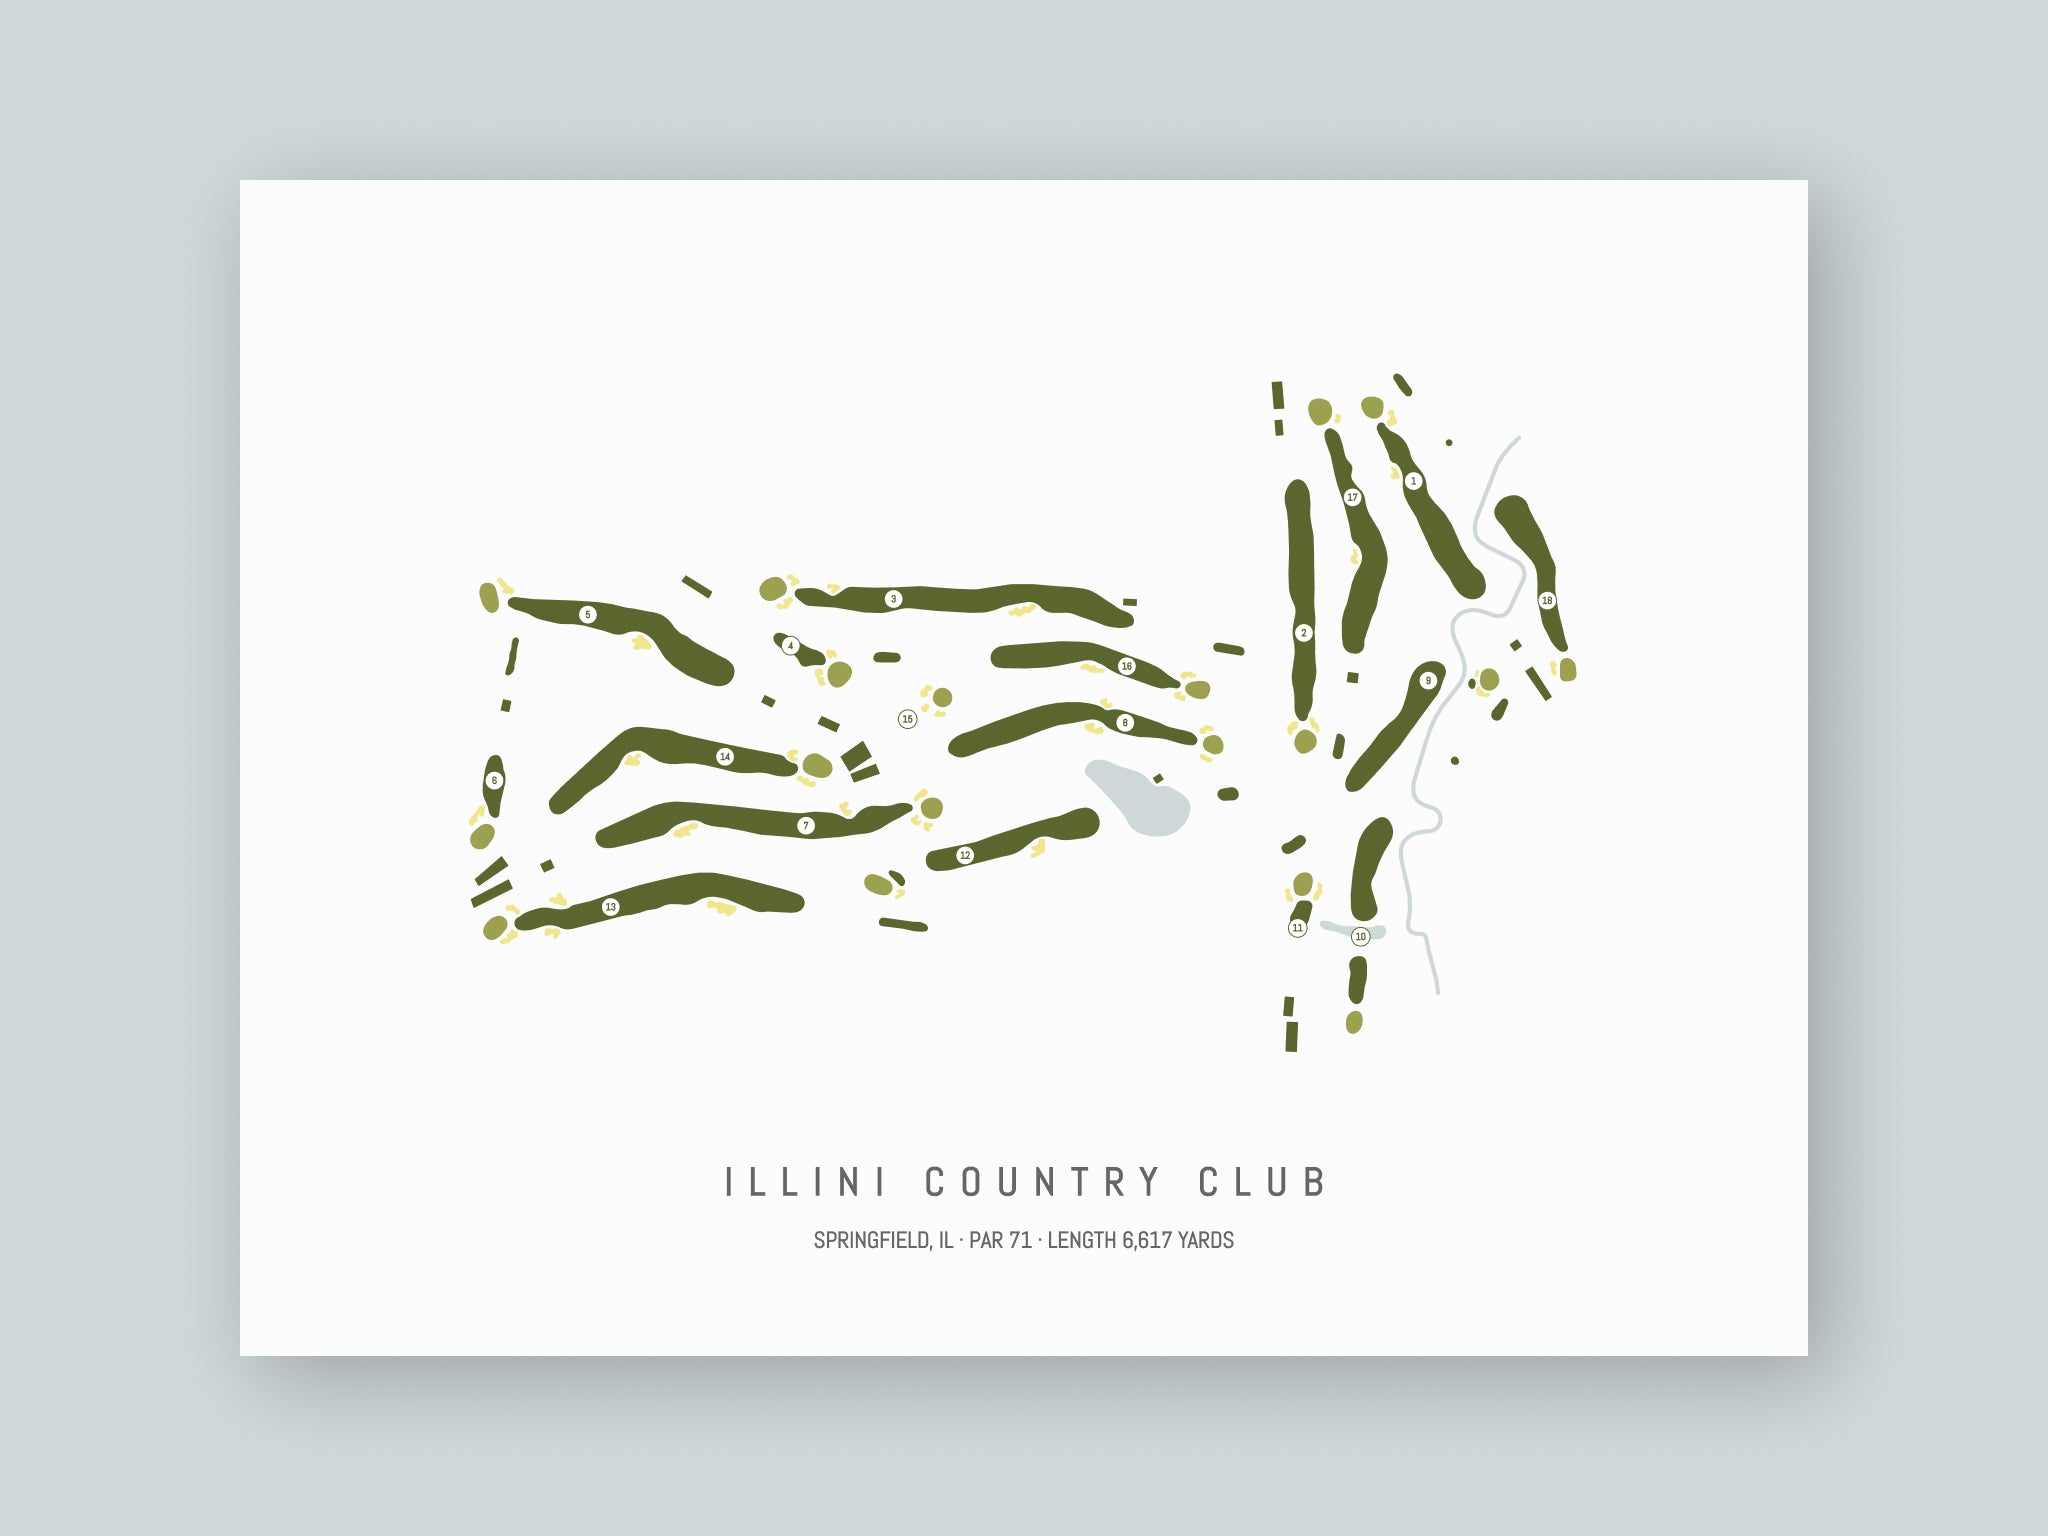 Illini-Country-Club-IL--Unframed-24x18-With-Hole-Numbers